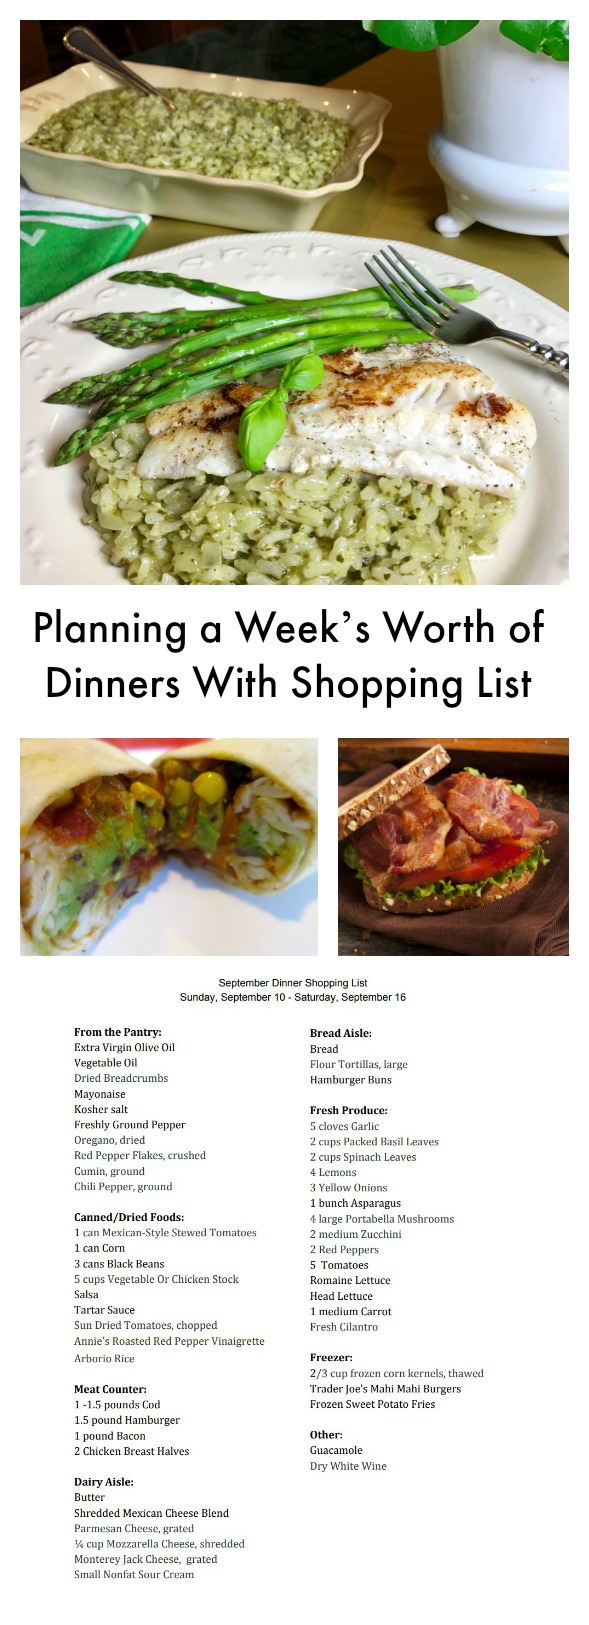 Planning a Week's Worth of Dinners With Shopping List makes your meal planning this week super easy. Many fast dinners are on the menu this week.